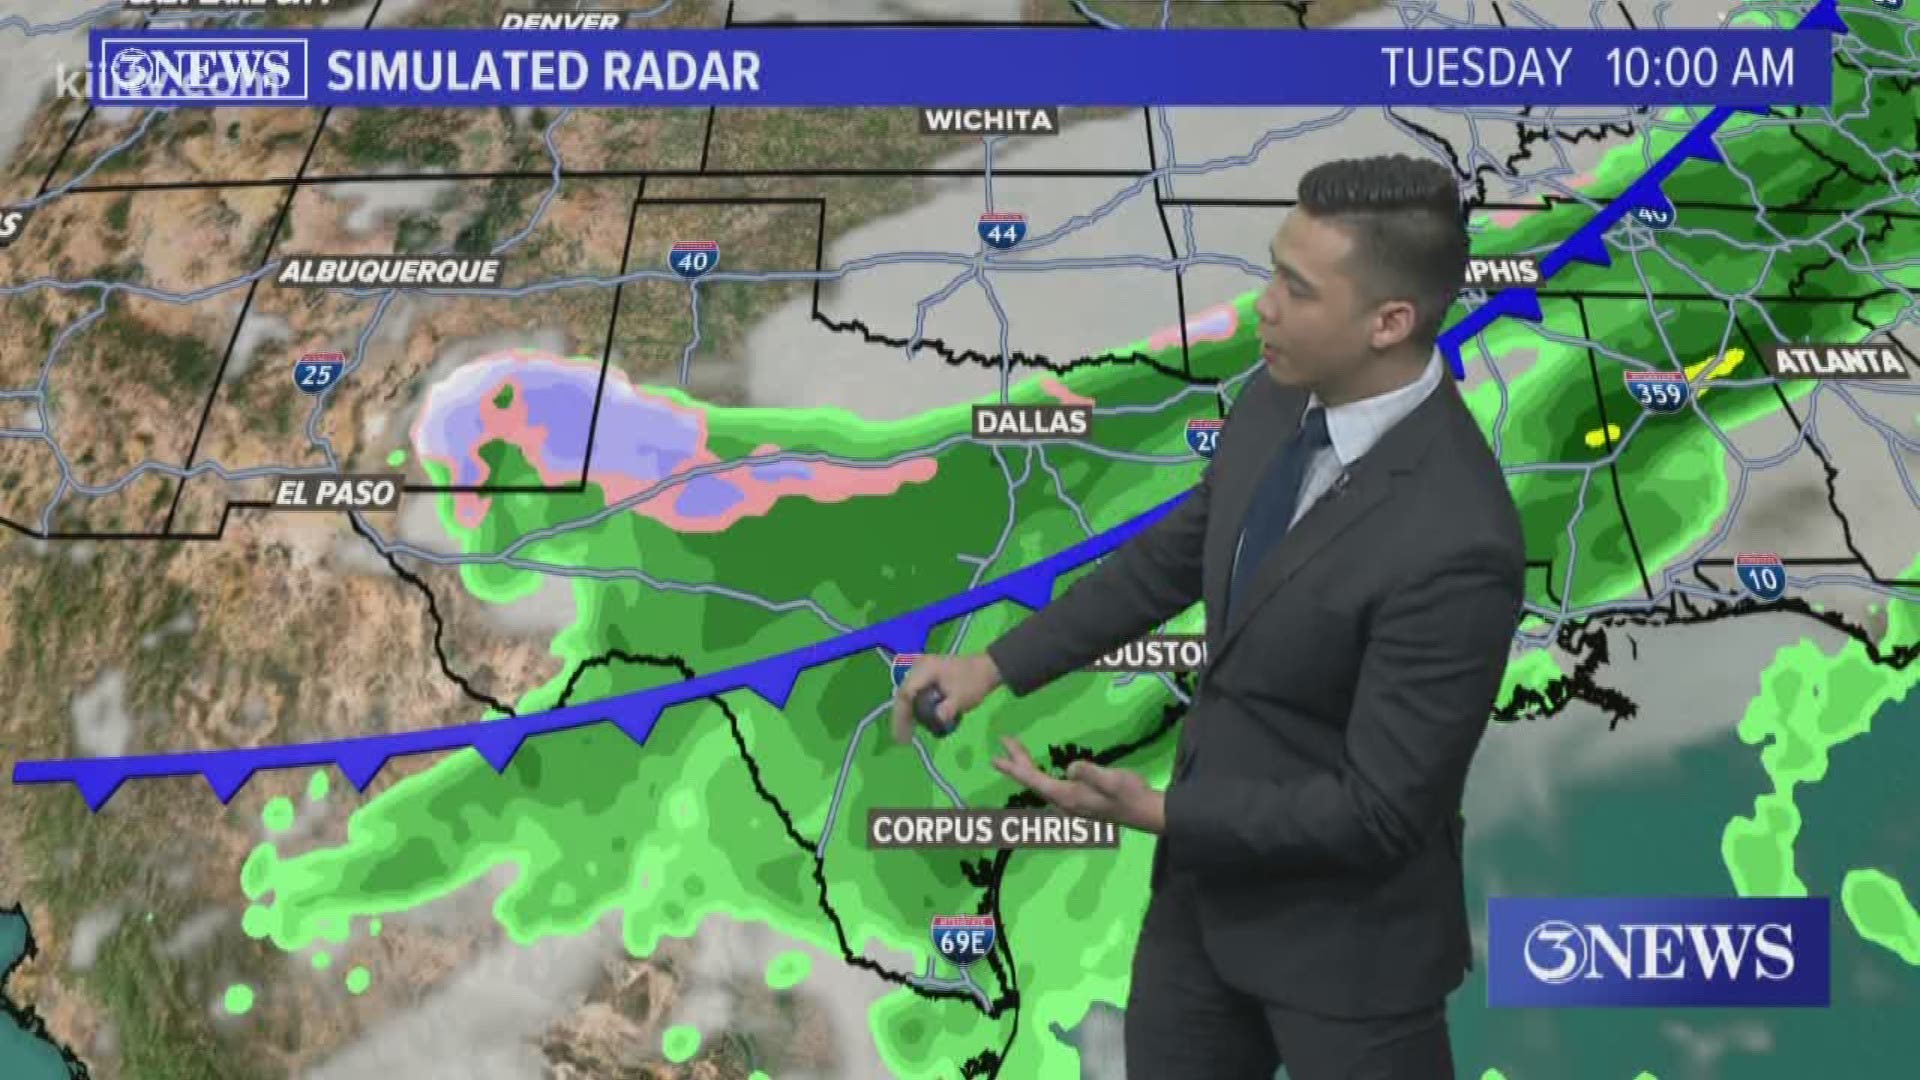 Next big cold front will slide through on Tuesday bringing in colder air and light rain.